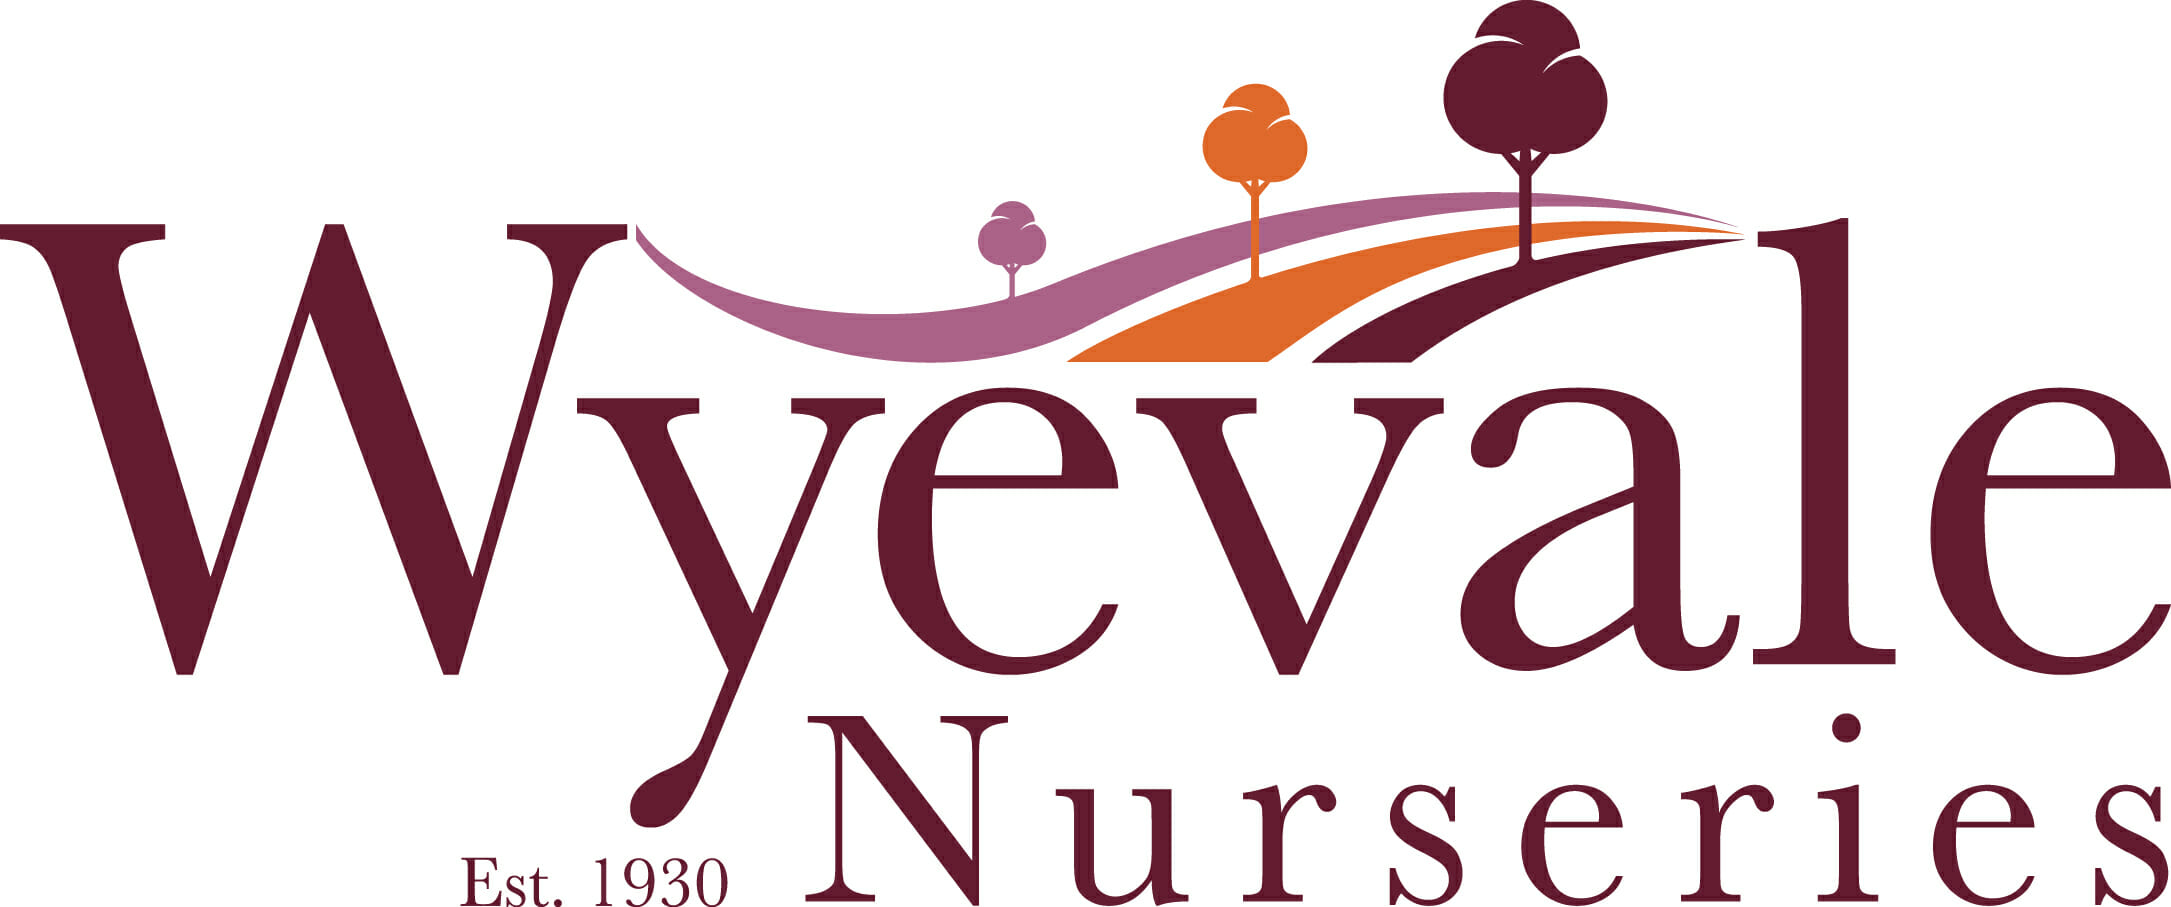 FEATURED JOB | Sales Support Role at Wyevale Nurseries